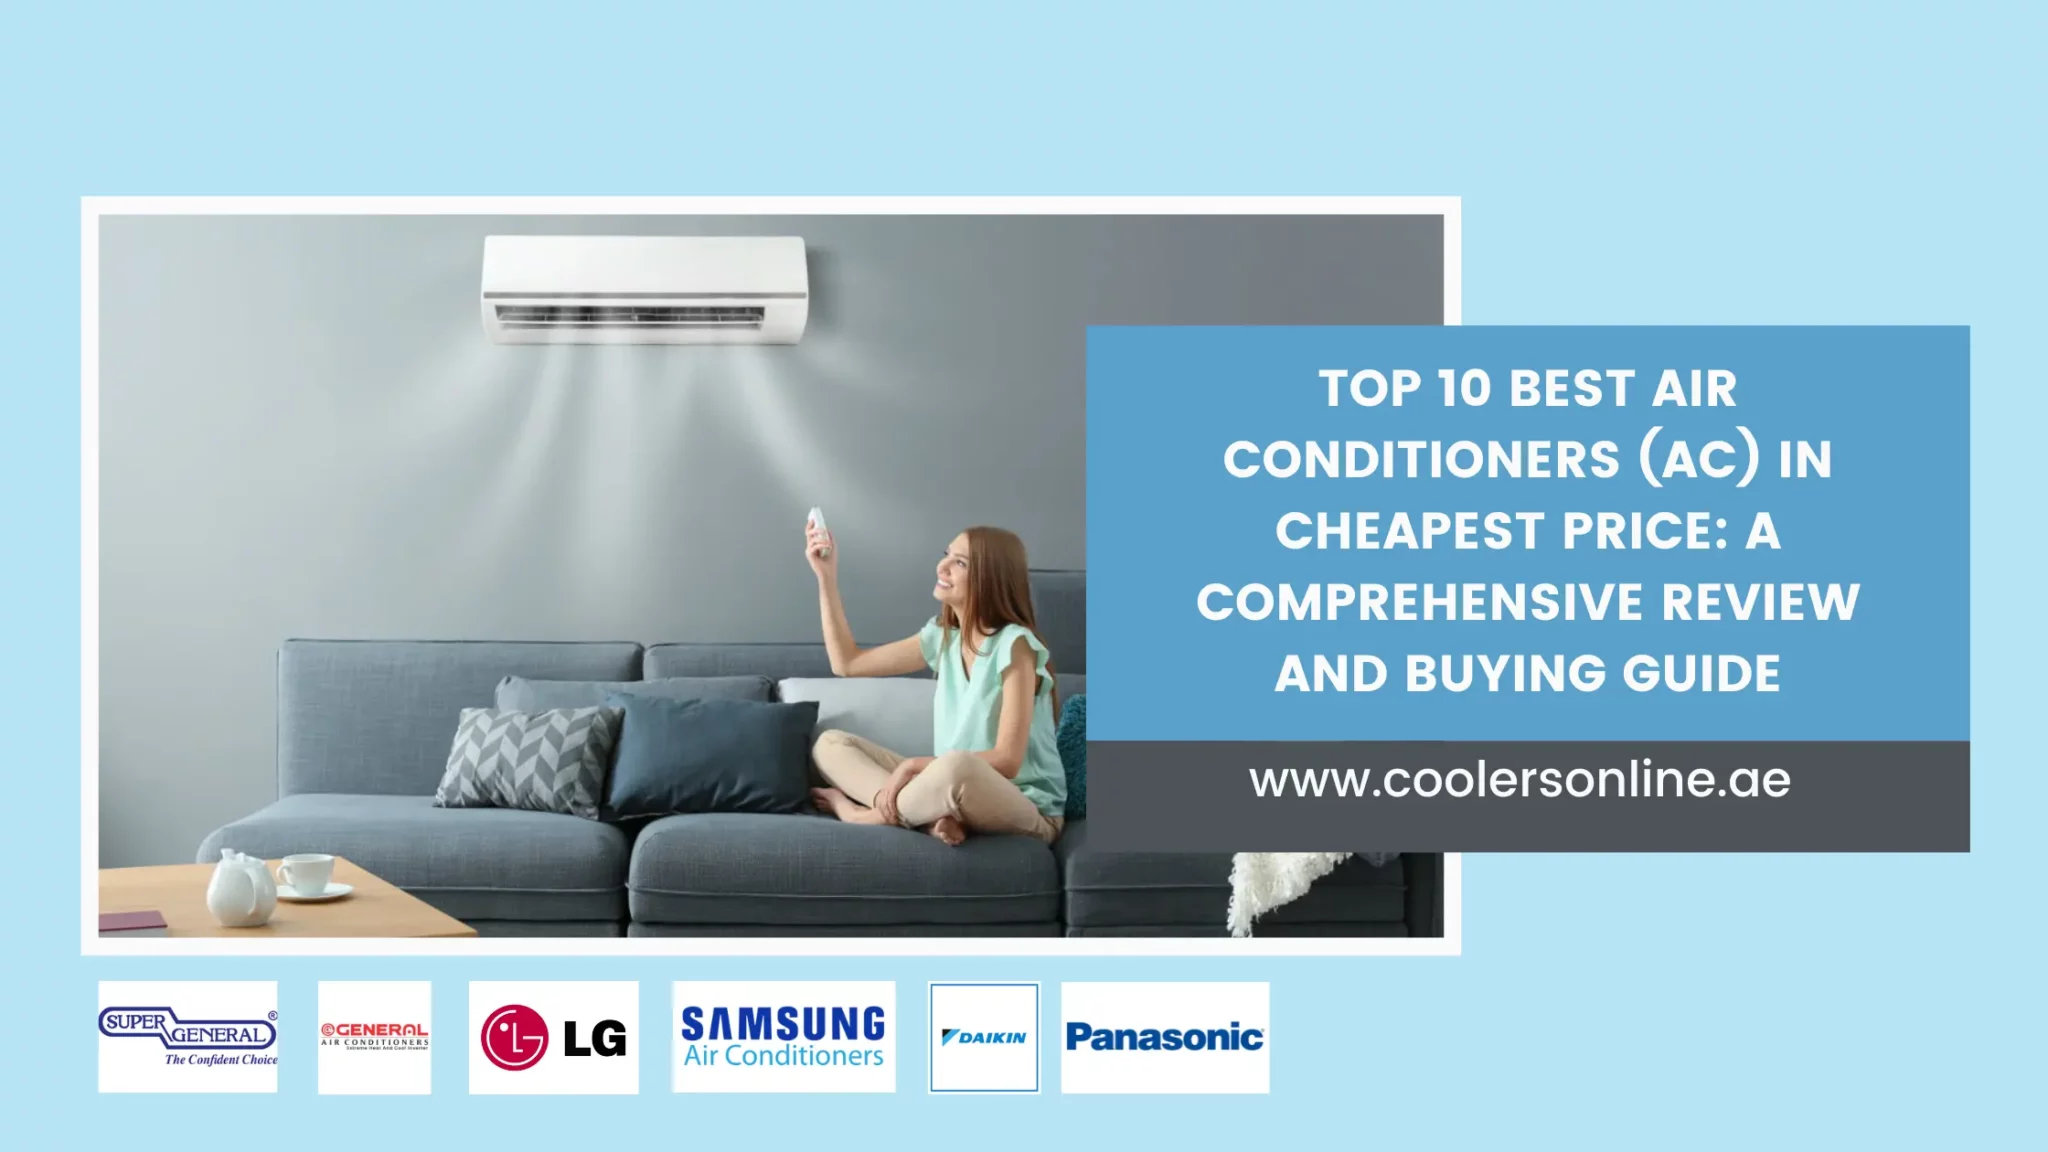 Top 10 Best Air Conditioners (AC) in Cheapest Price: A Comprehensive Review and Buying Guide